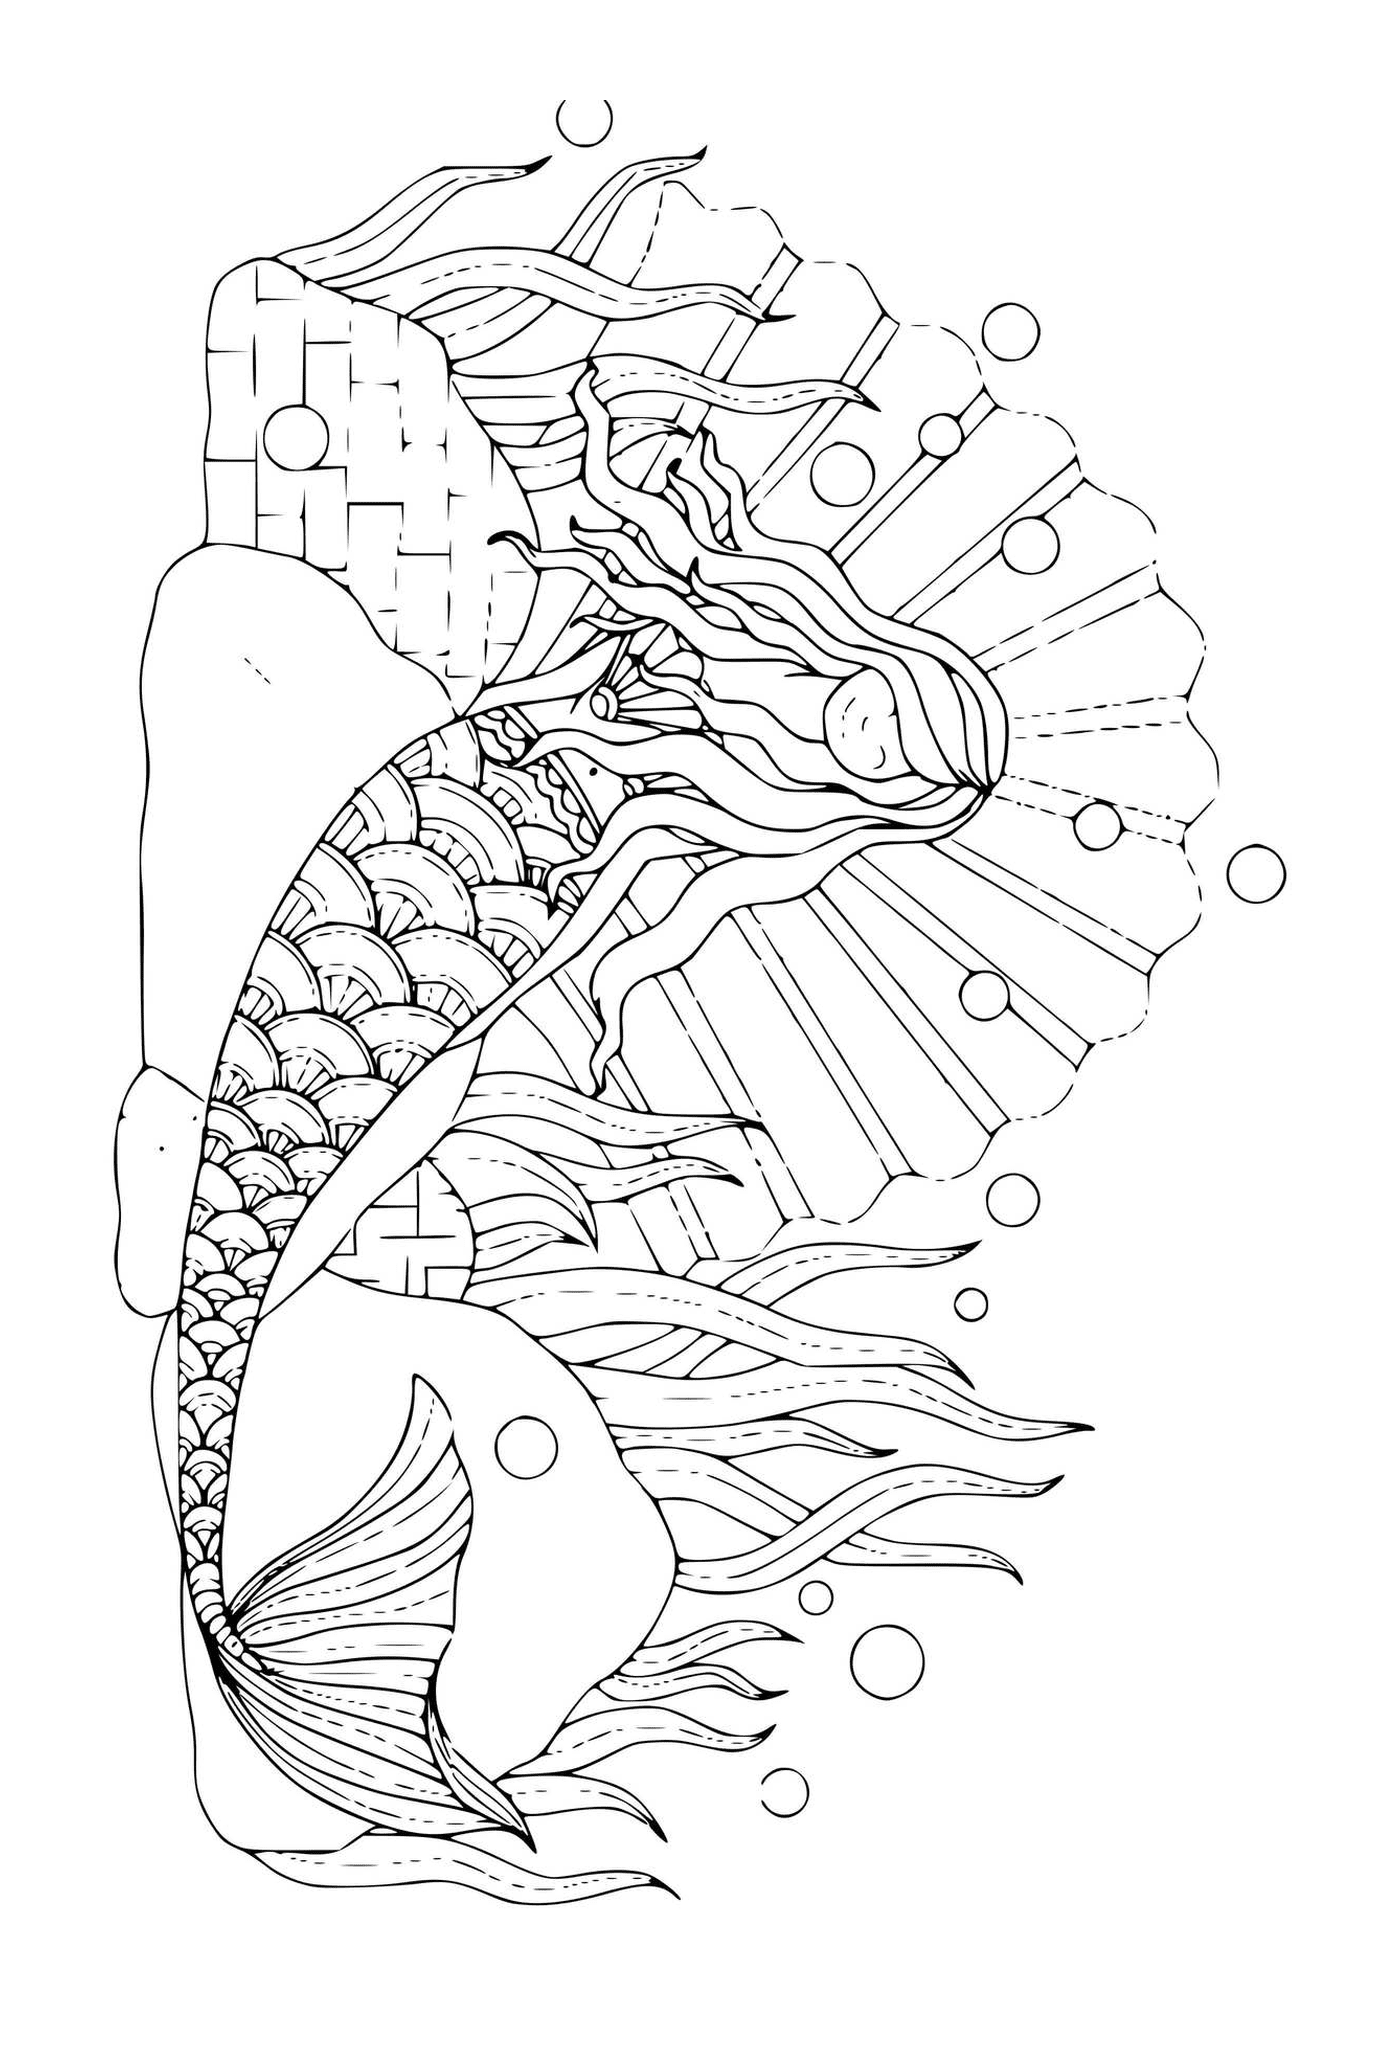  Adult of a sirene and a fish 